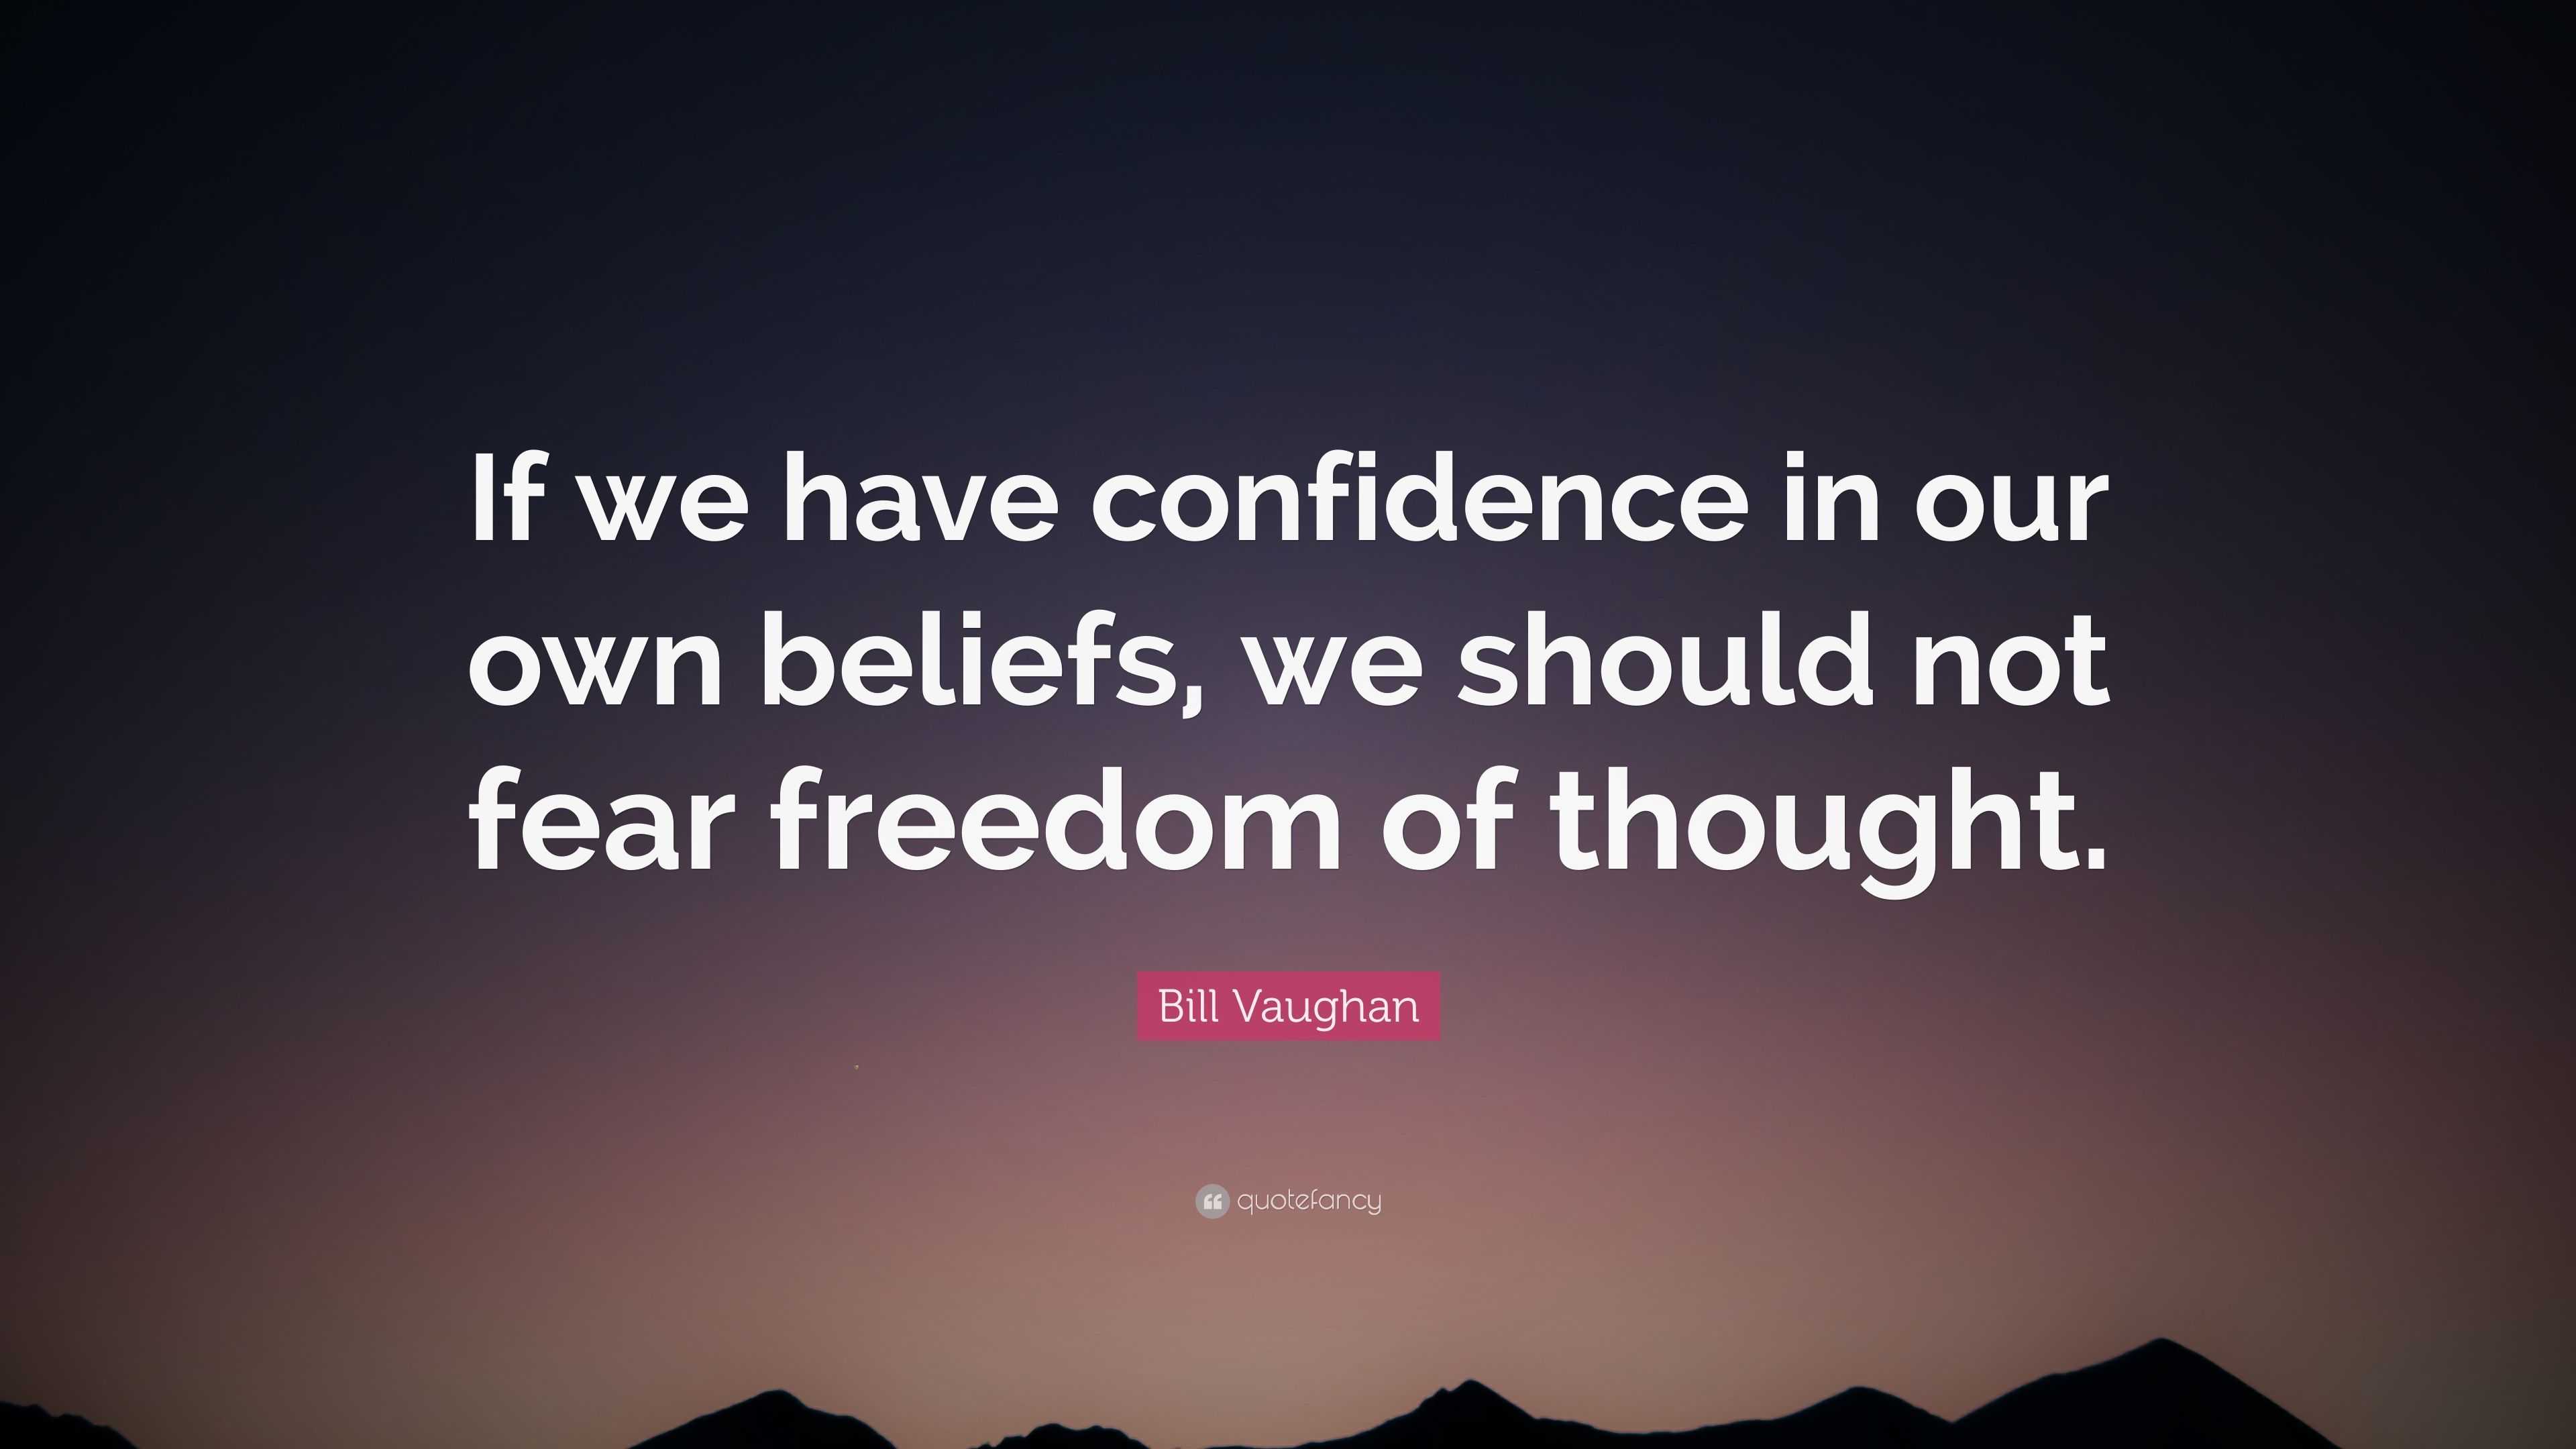 Bill Vaughan Quote: “If we have confidence in our own beliefs, we ...